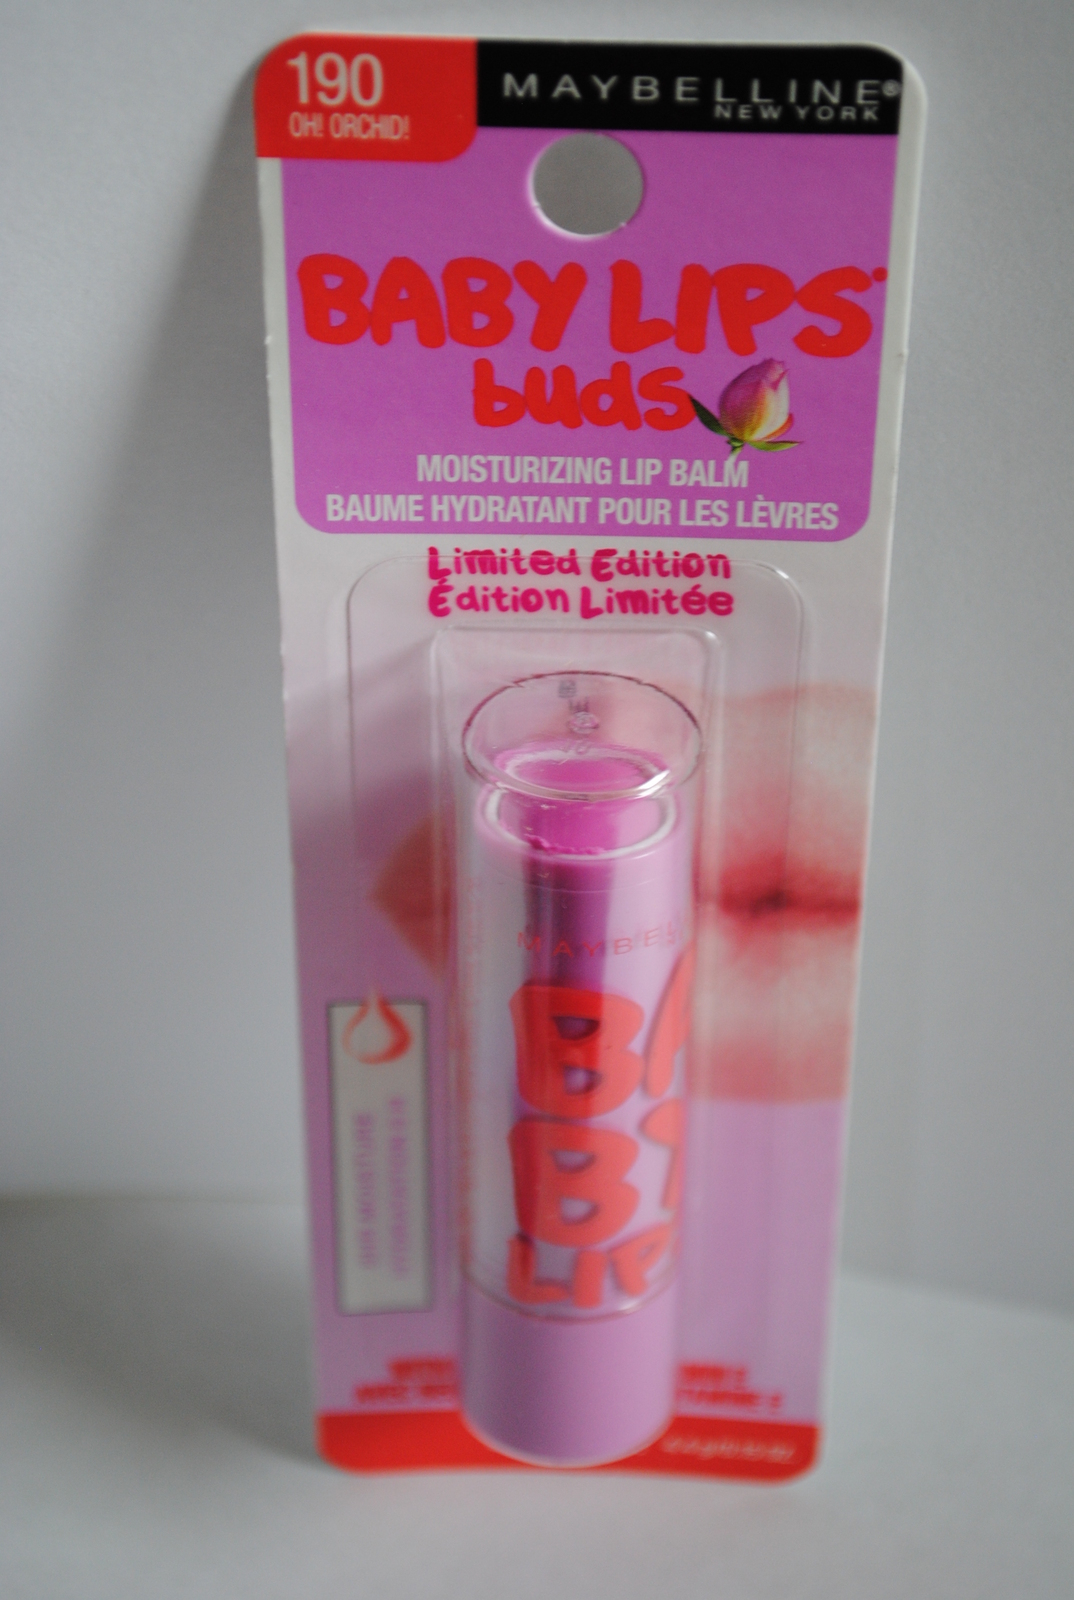 Primary image for Maybelline Limited Edition Baby Lips Buds - 190 Oh! Orchid!